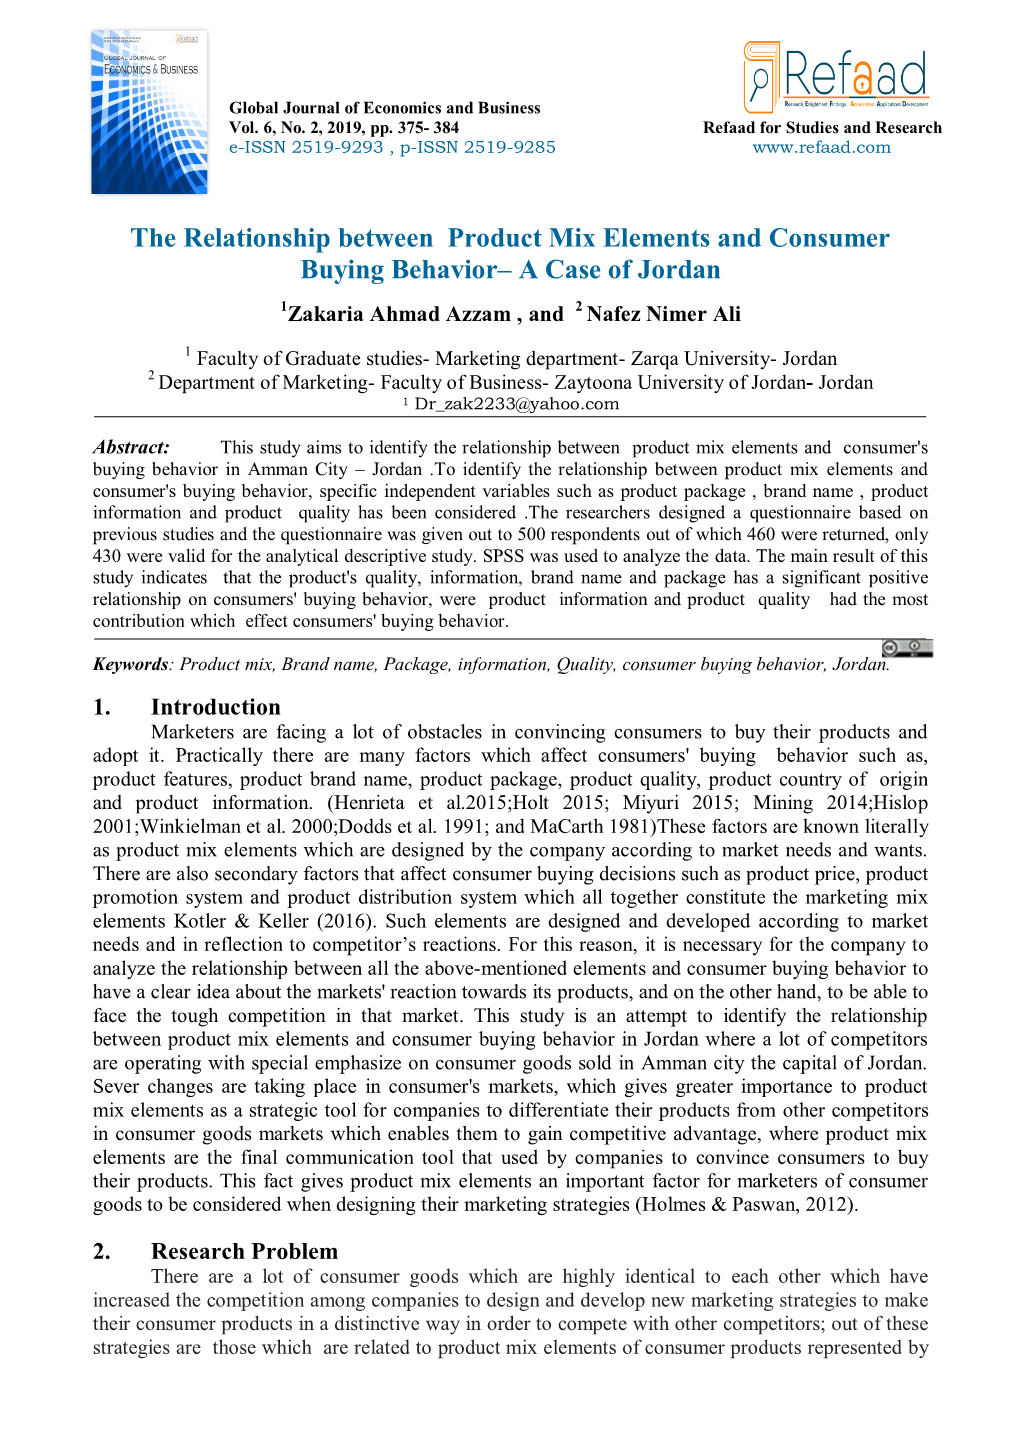 The Relationship Between Product Mix Elements and Consumer Buying Behavior– a Case of Jordan